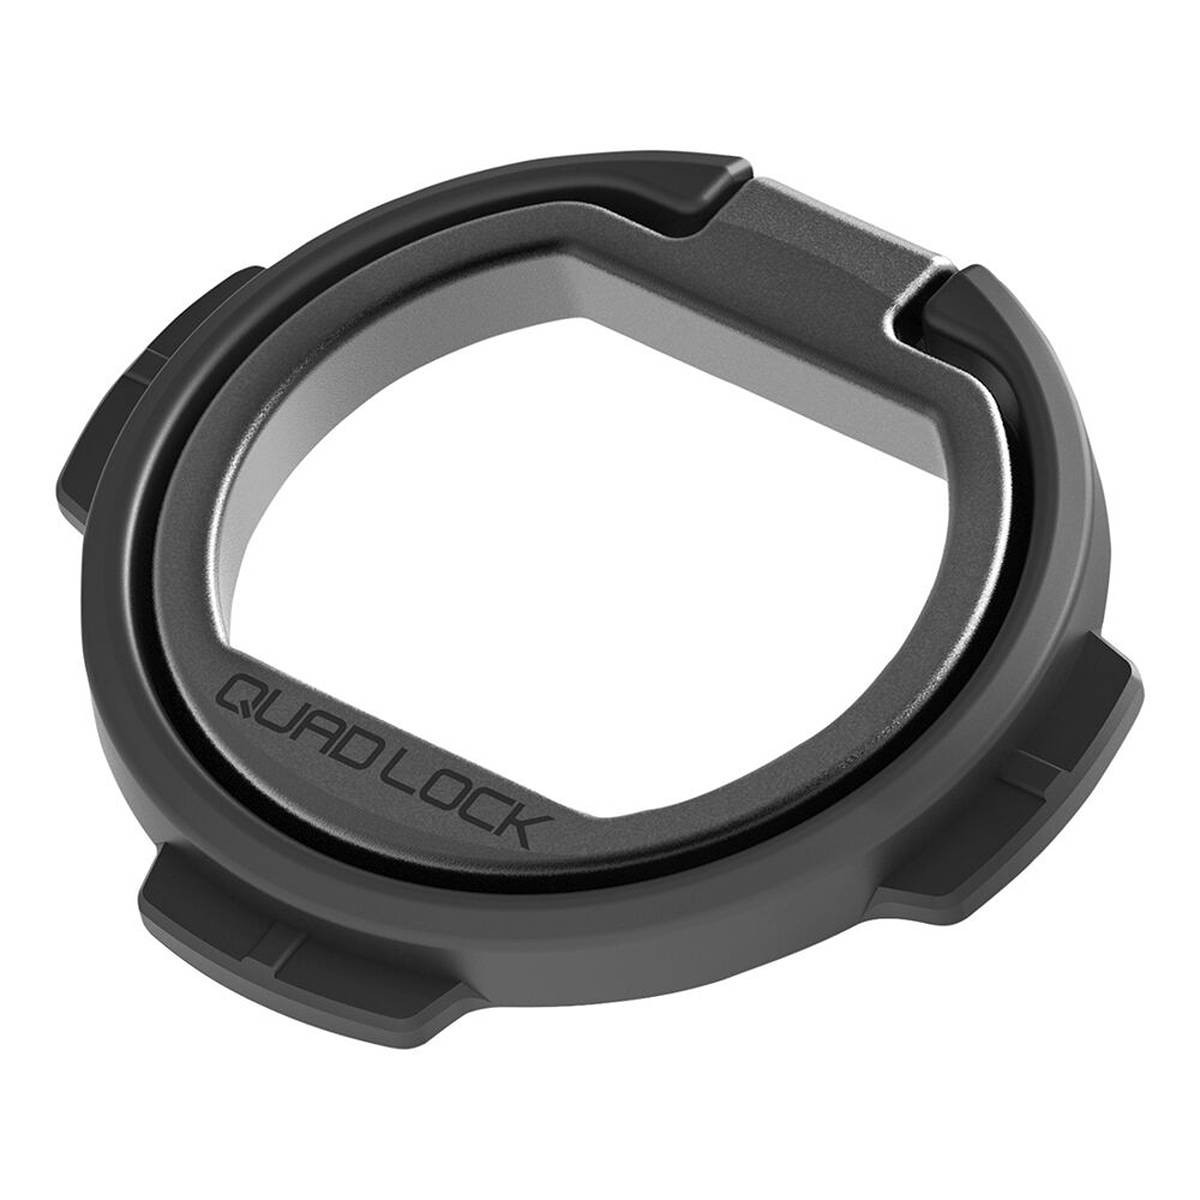 Quad Lock Phone Ring / Stand Size